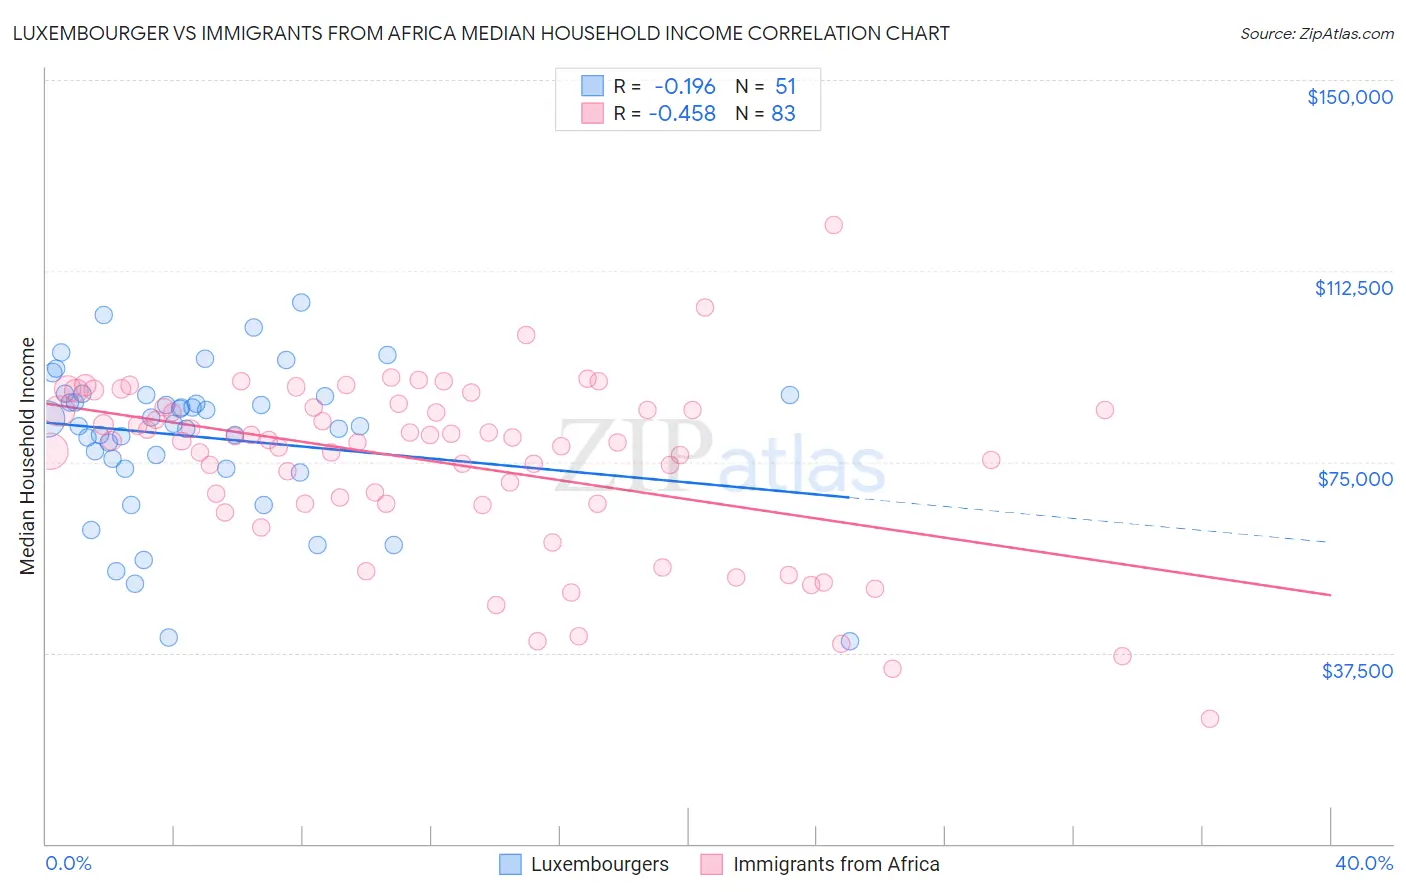 Luxembourger vs Immigrants from Africa Median Household Income